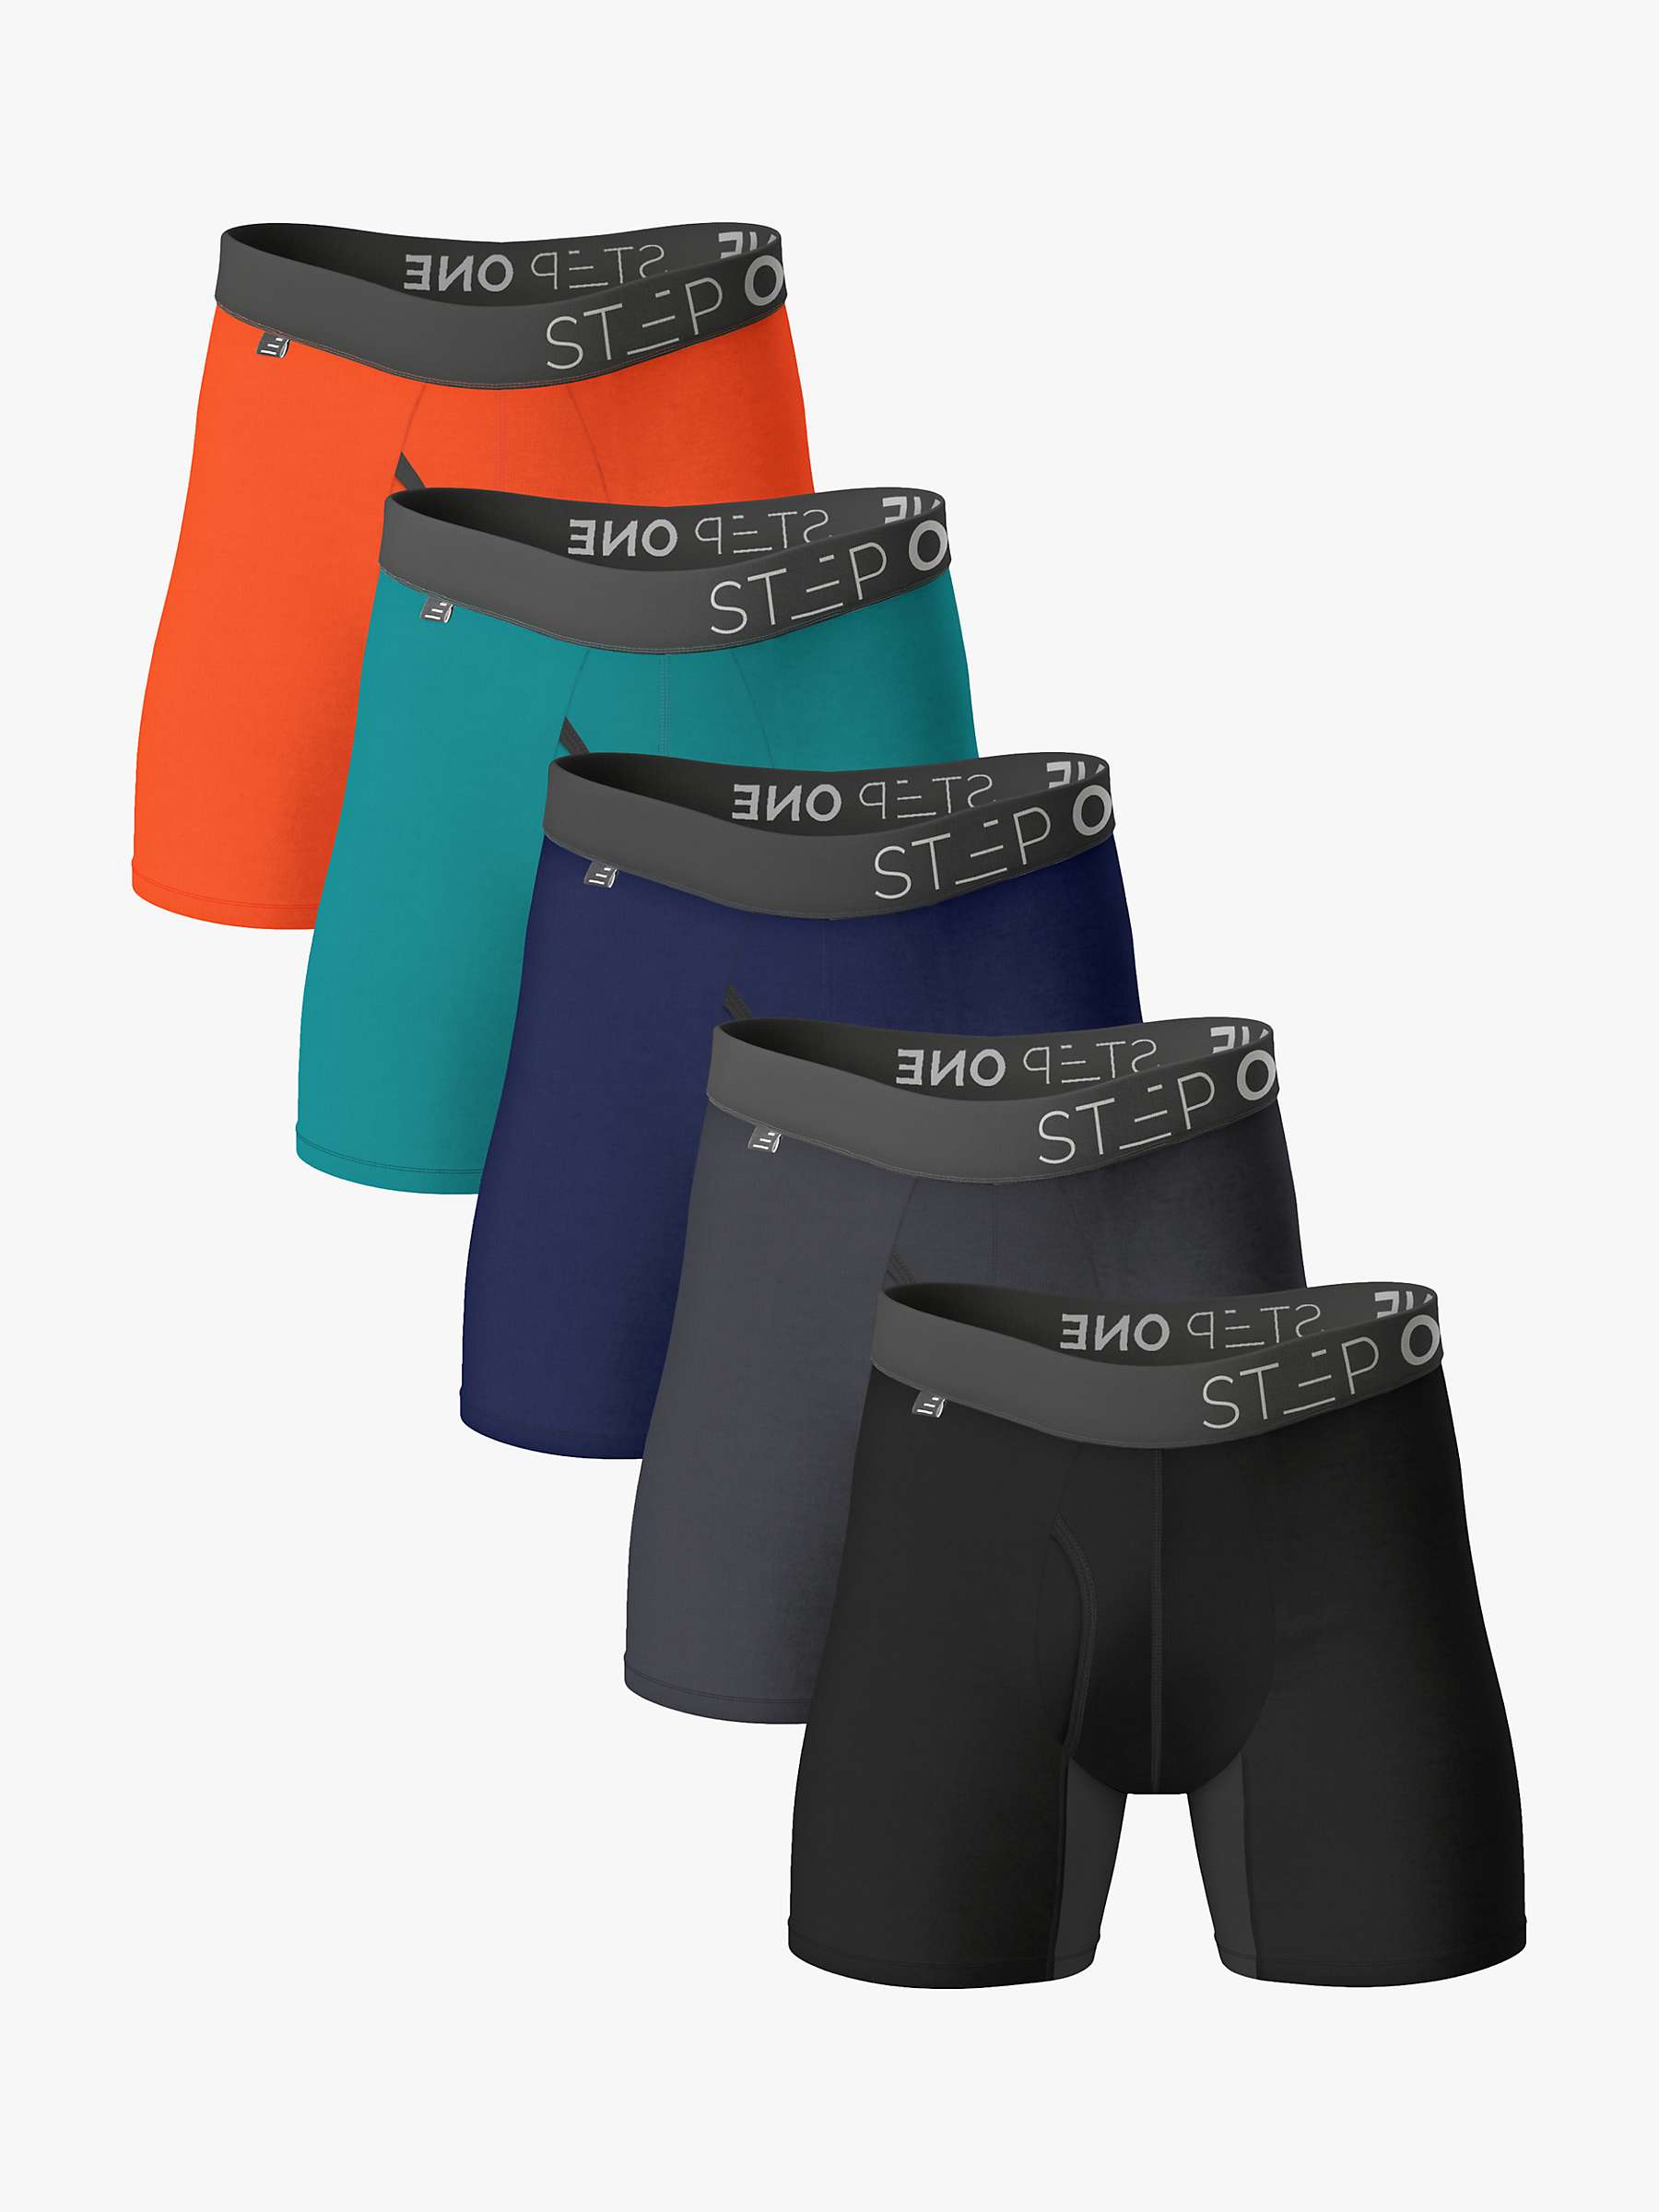 Buy Step One Bamboo Boxer Briefs, Pack of 5, Multi Online at johnlewis.com